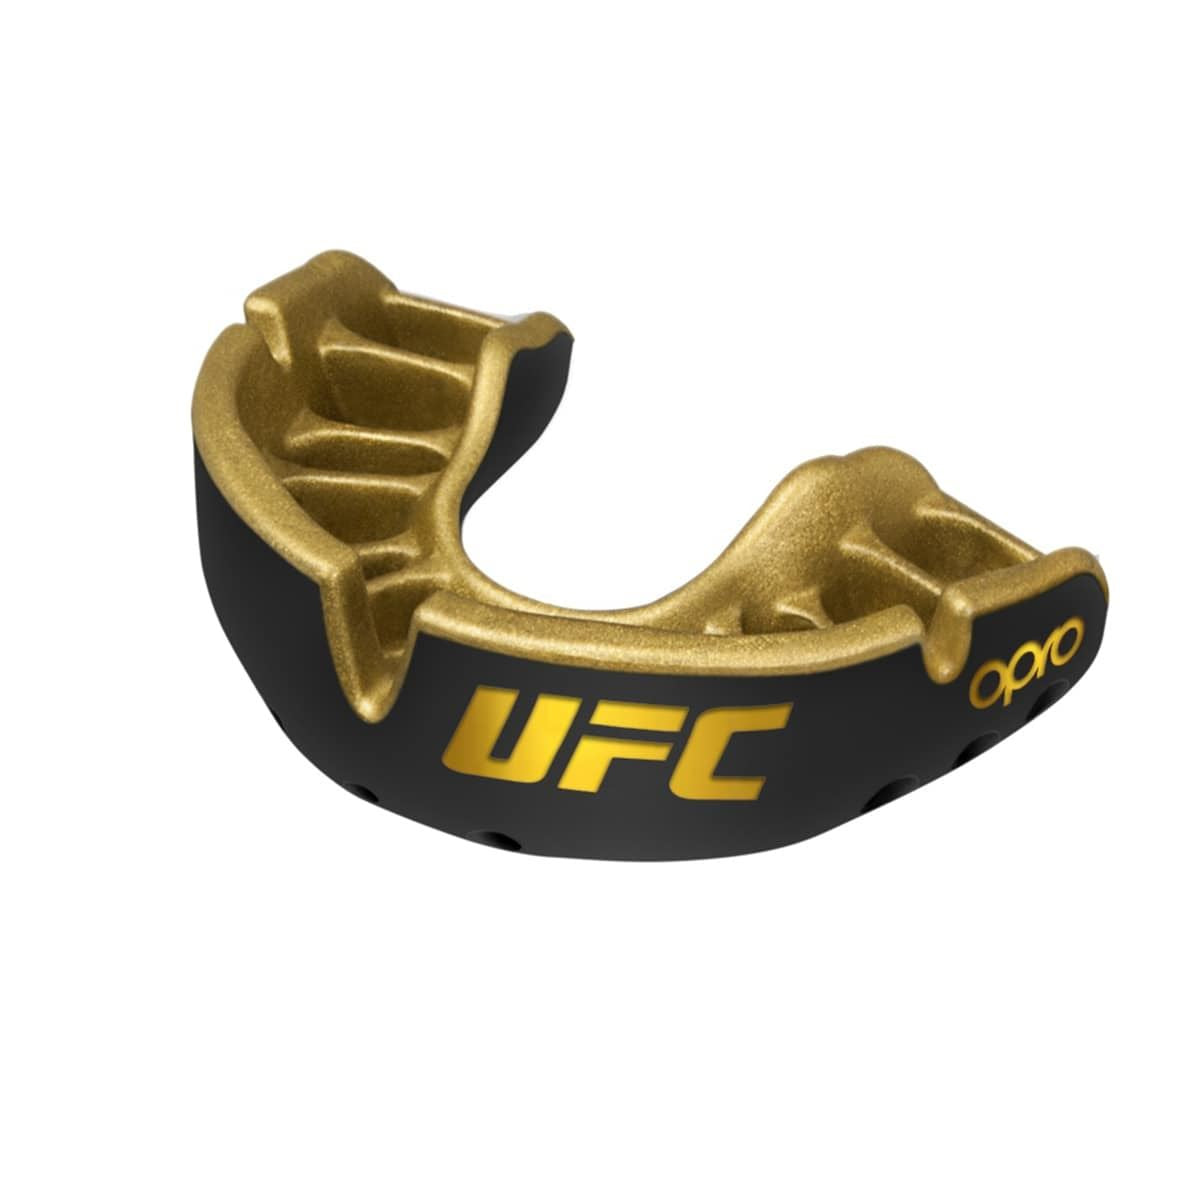 Men's Rugby Protective Mouthguard Opro Self-Fit Gold Adult UFC 2022 Black/Gold